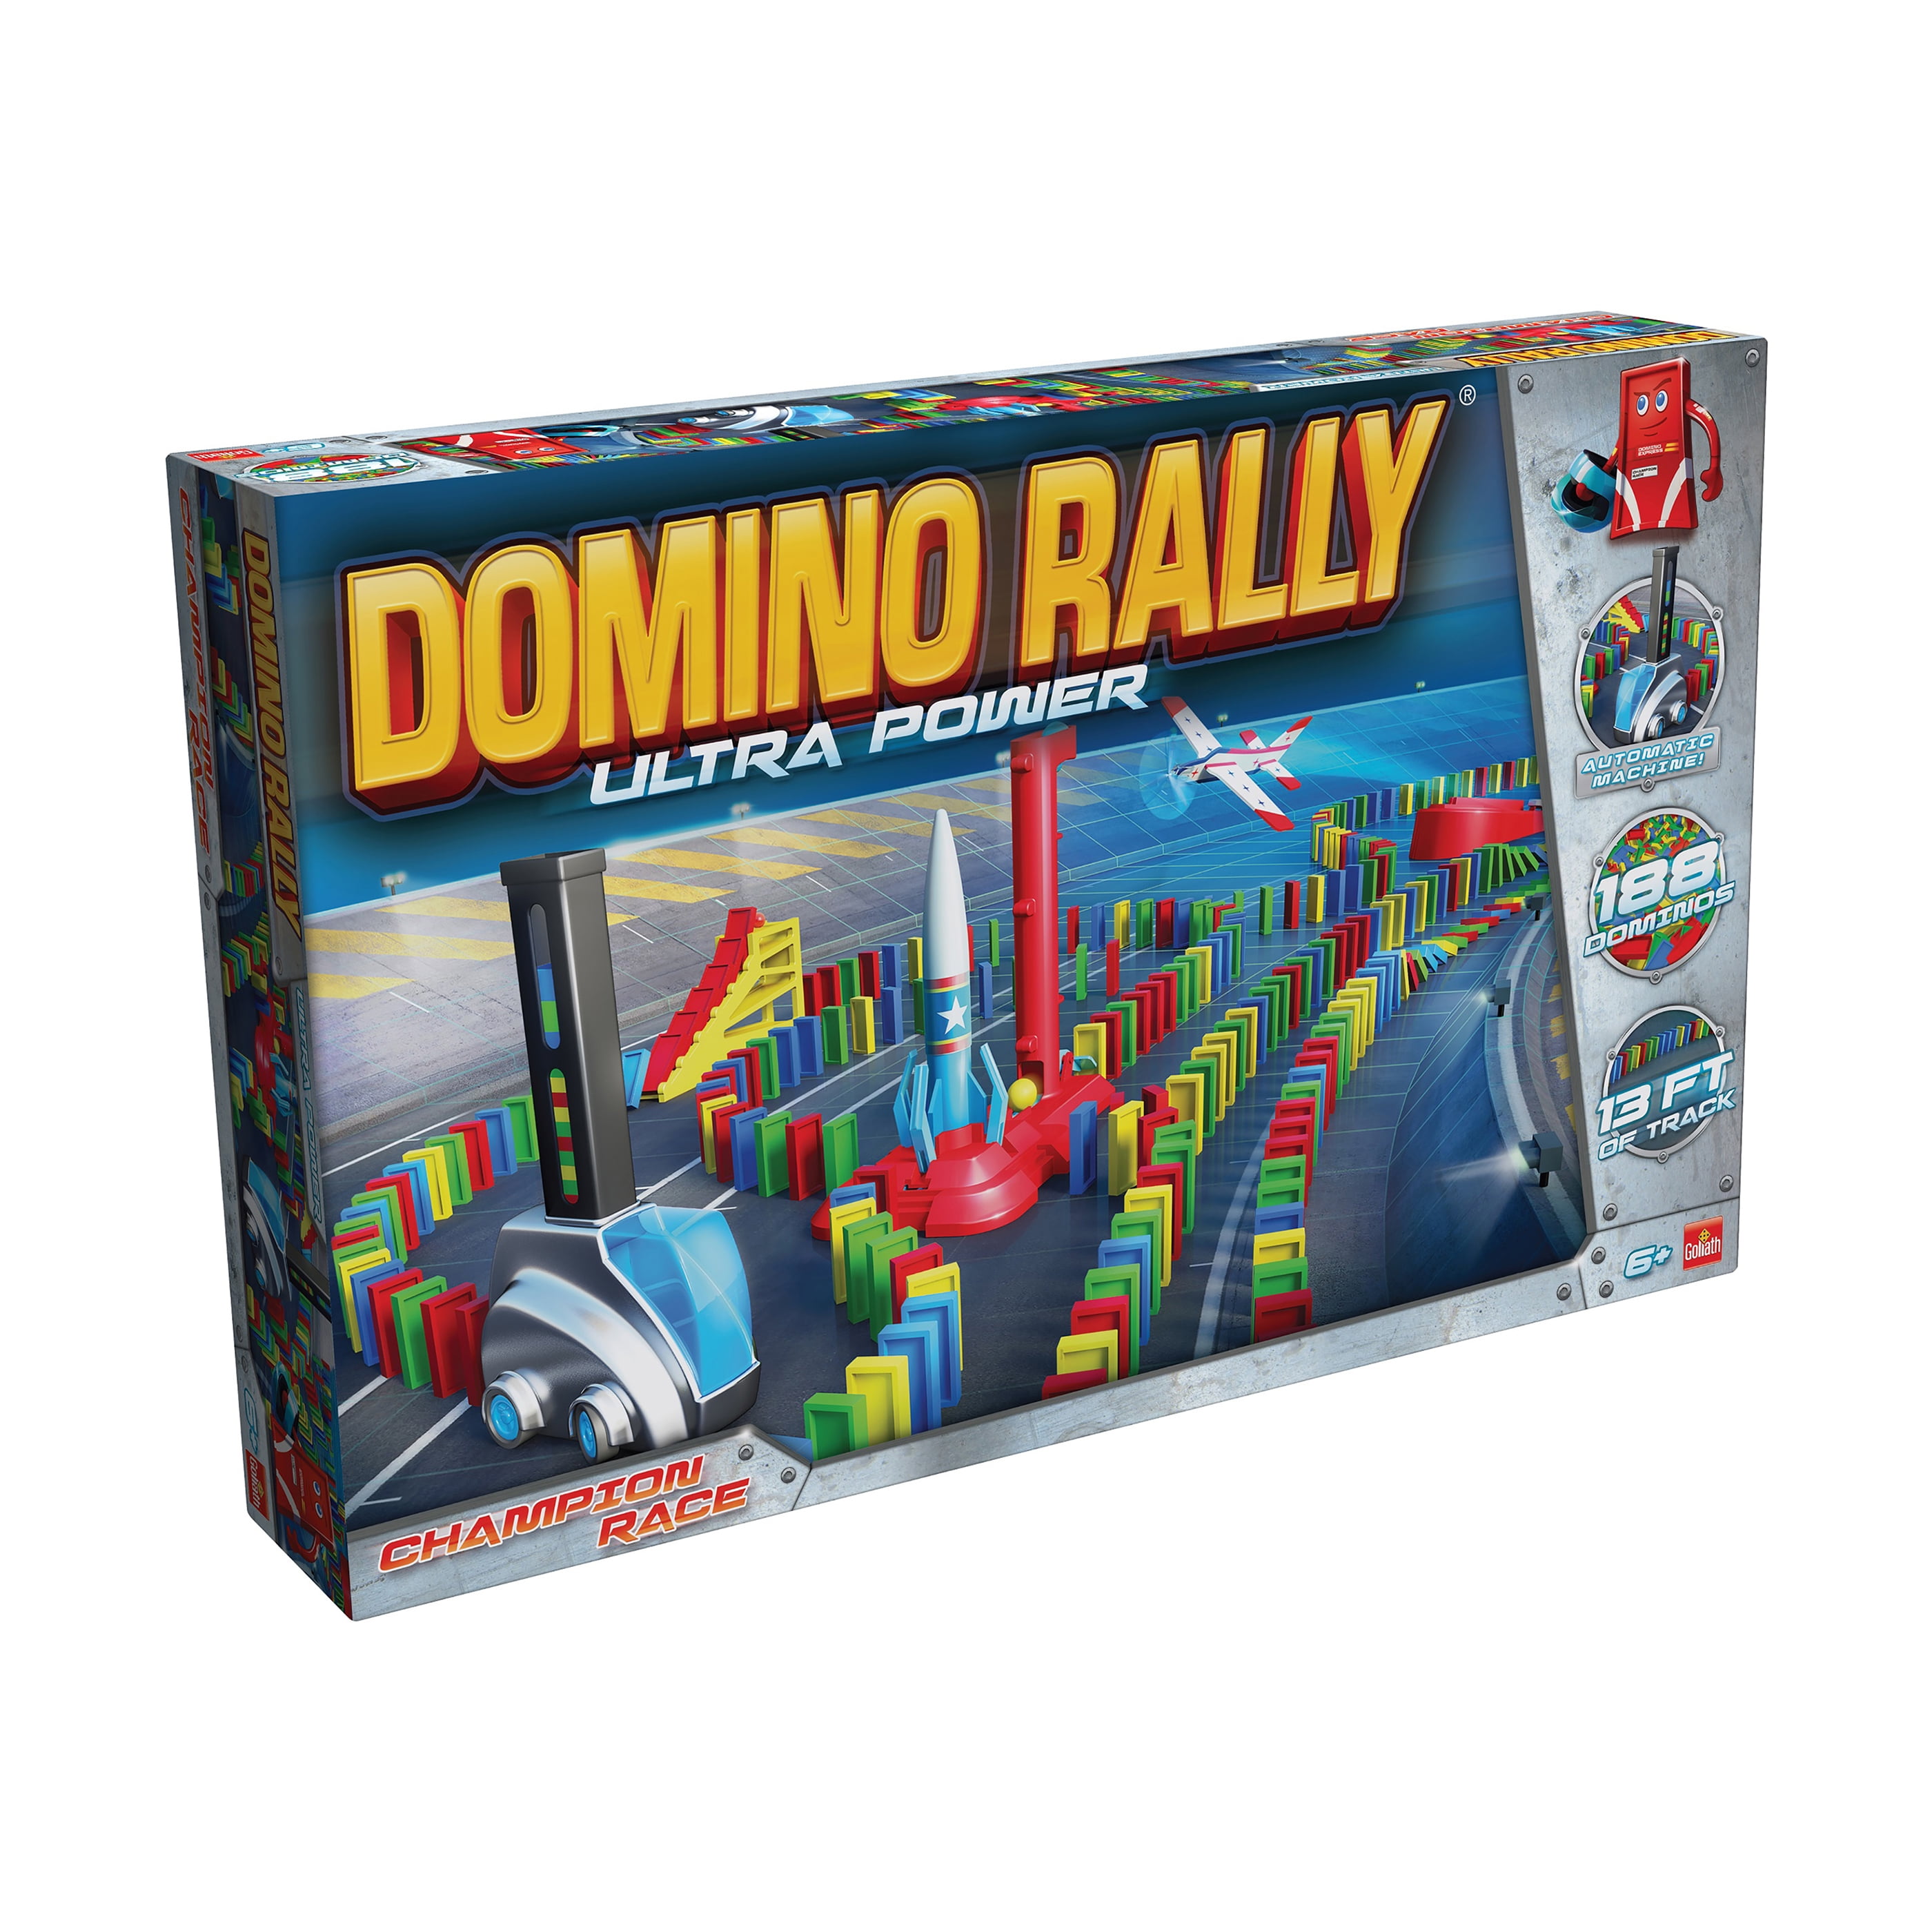 Goliath Games Domino Rally Epic Loop